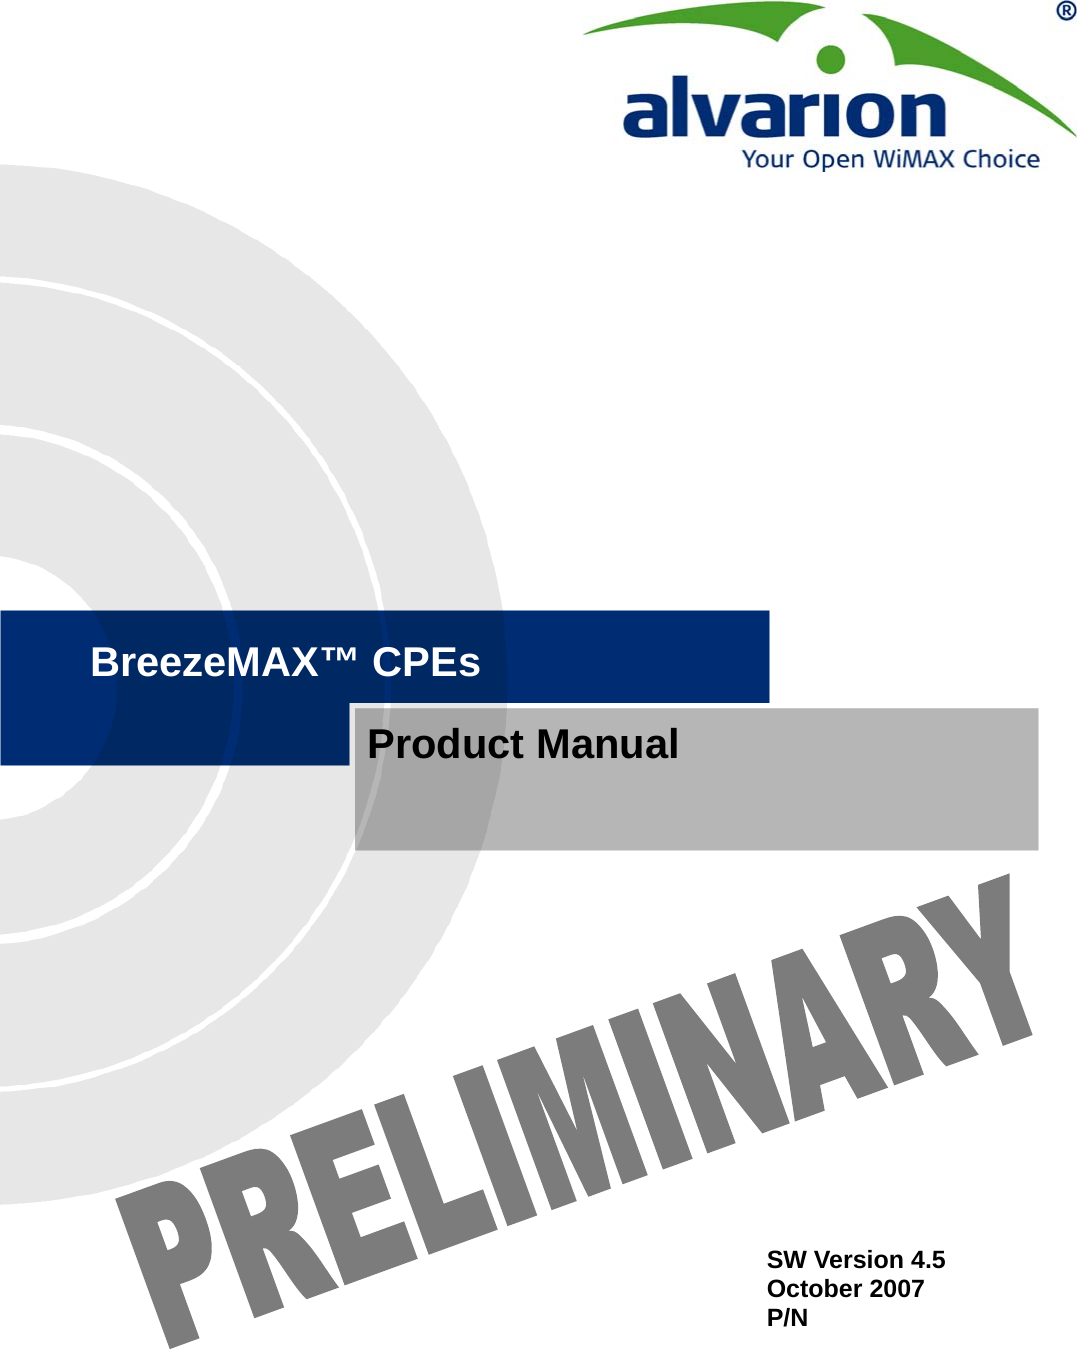 BreezeMAX™ CPEsProduct ManualSW Version 4.5October 2007P/N